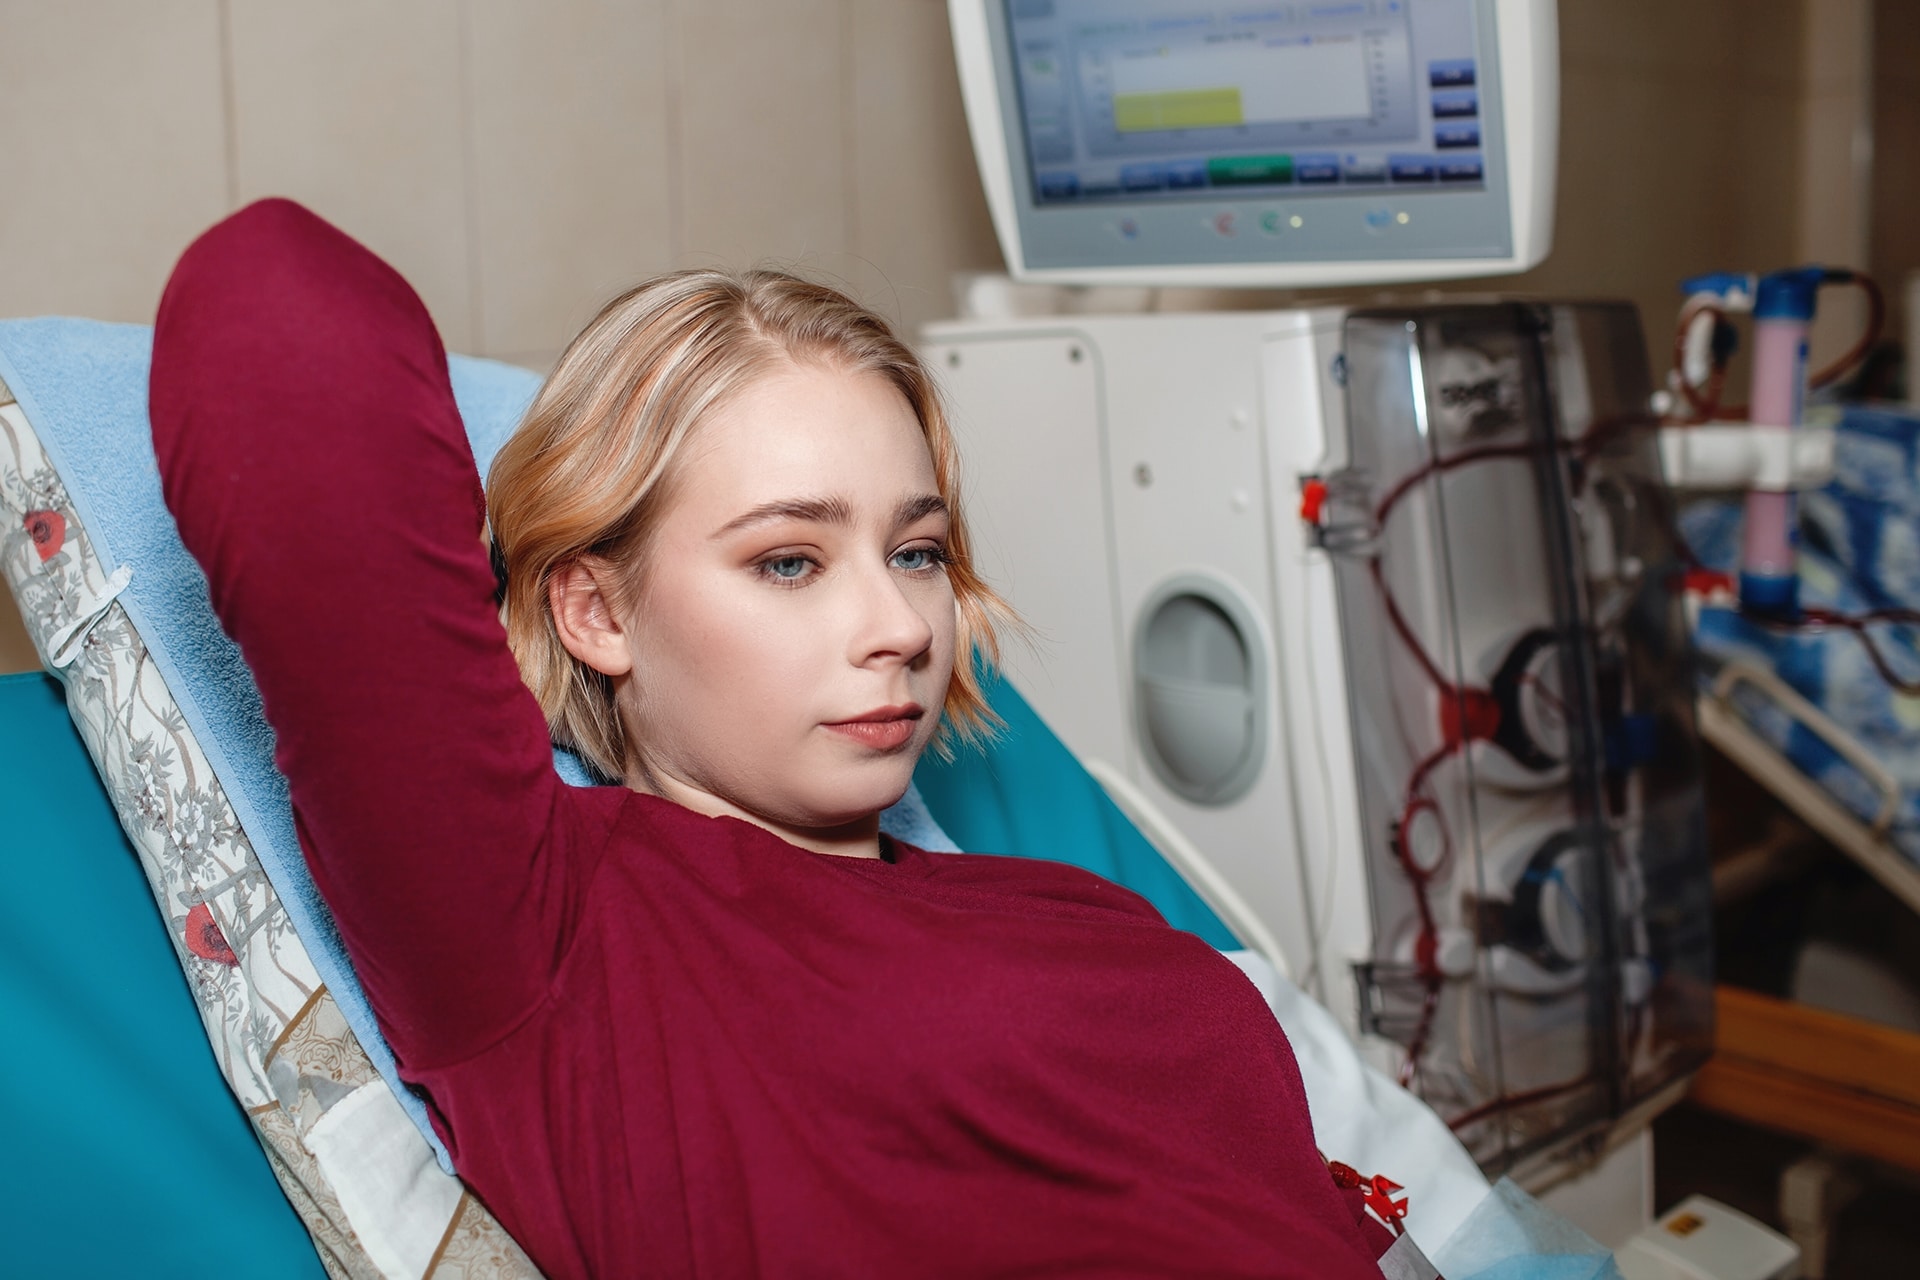 Young girl on hemodialysis in hospital, dialysis system equipment, kidney disease chronic patient